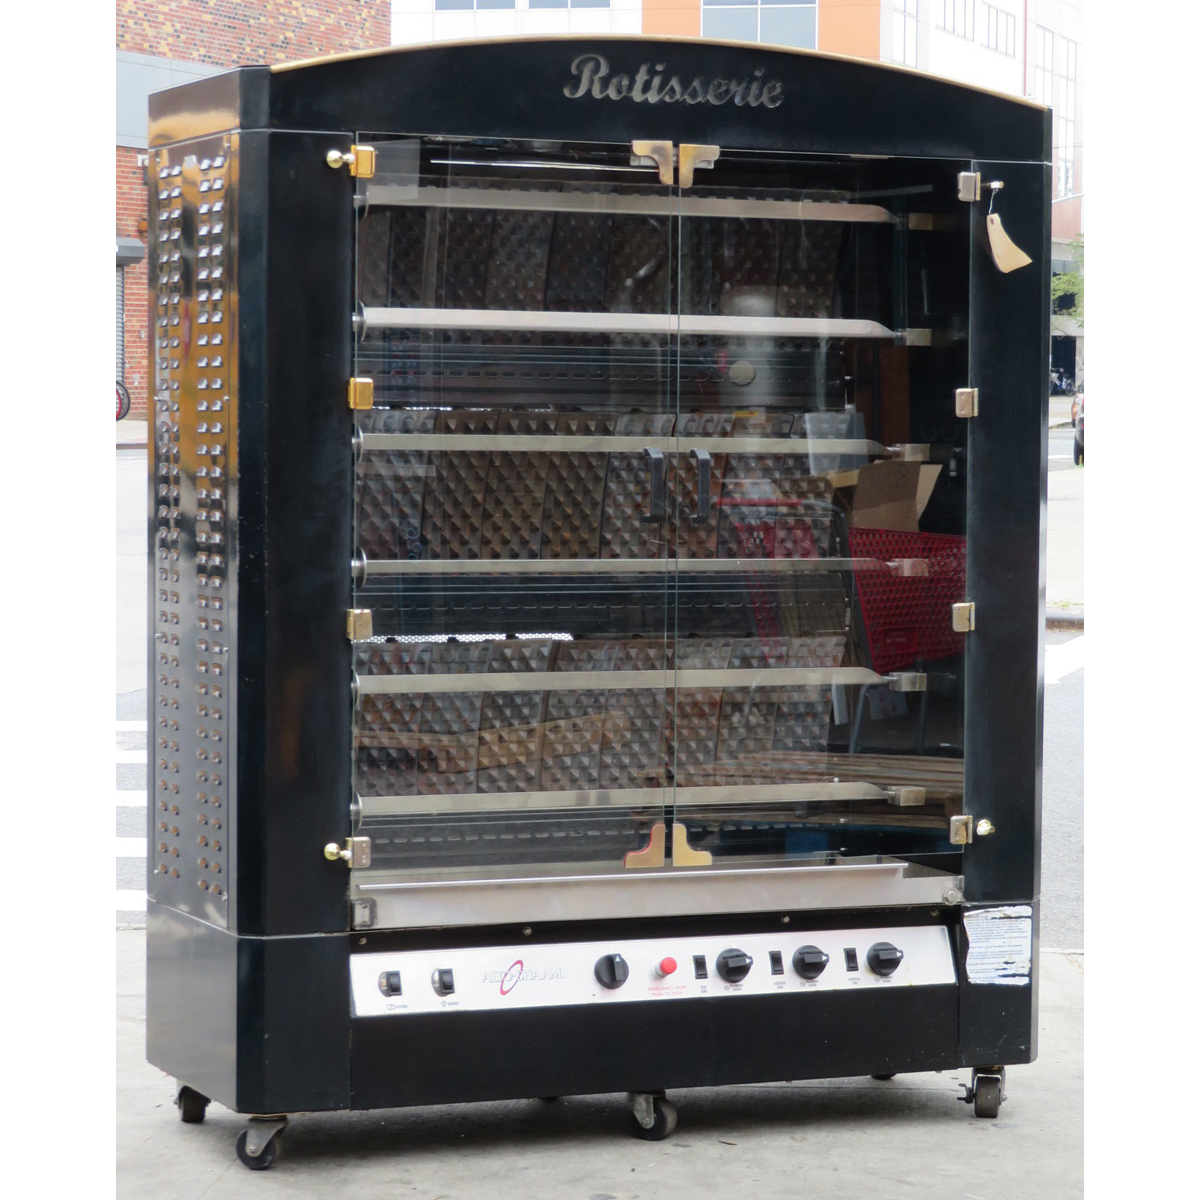 Alto Shaam AR-6G Vertical Gas Rotisserie with 6 Spits, Used Excellent Condition